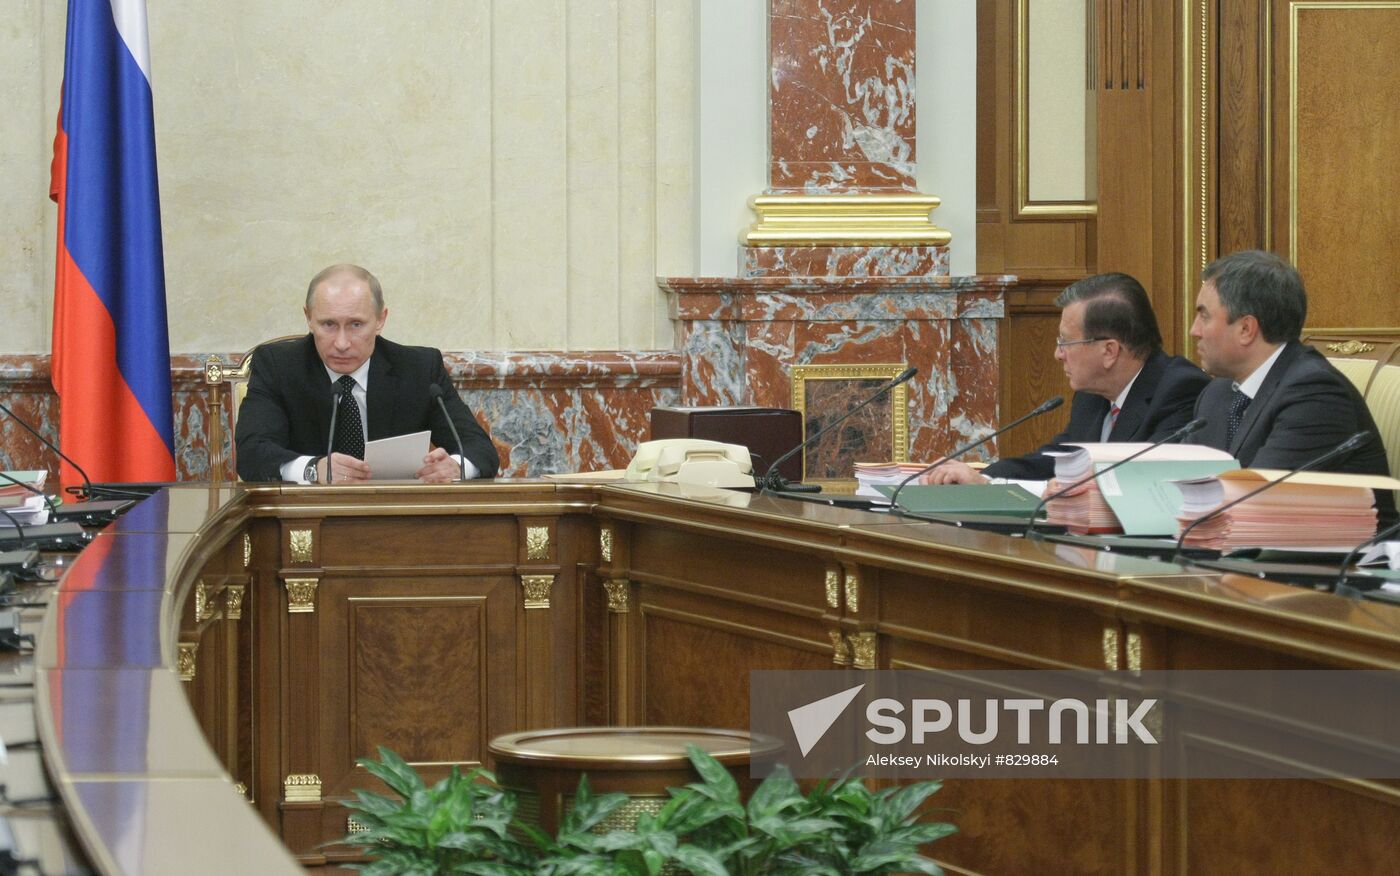 Putin holds Russian government meeting